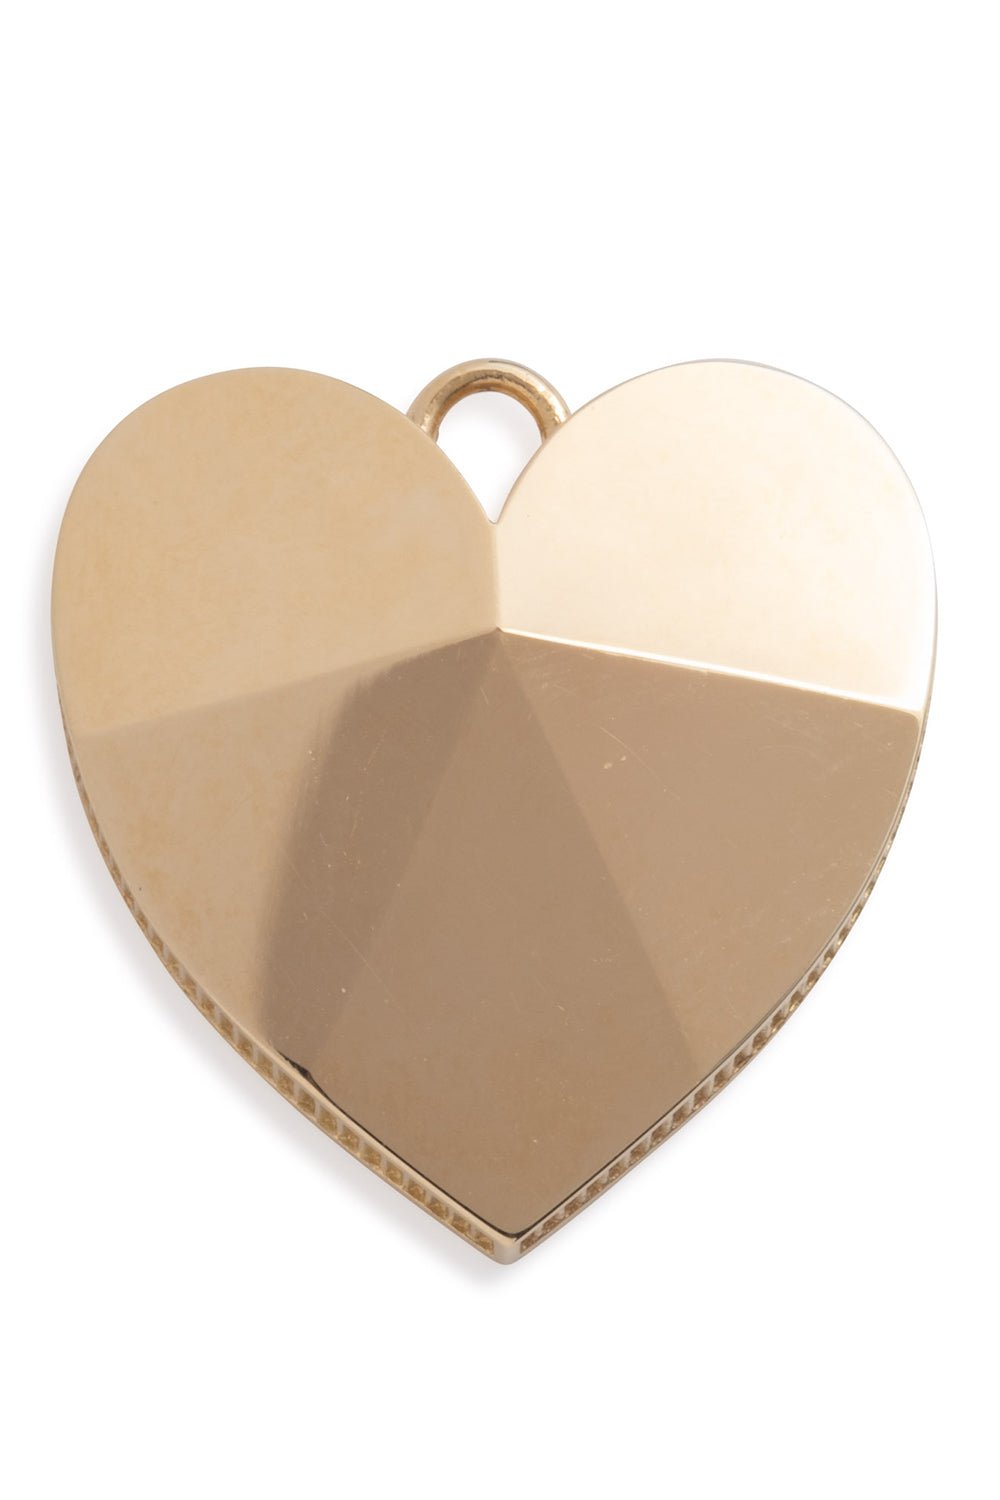 FOUNDRAE-True Love - Facets of Love Pendant-YELLOW GOLD